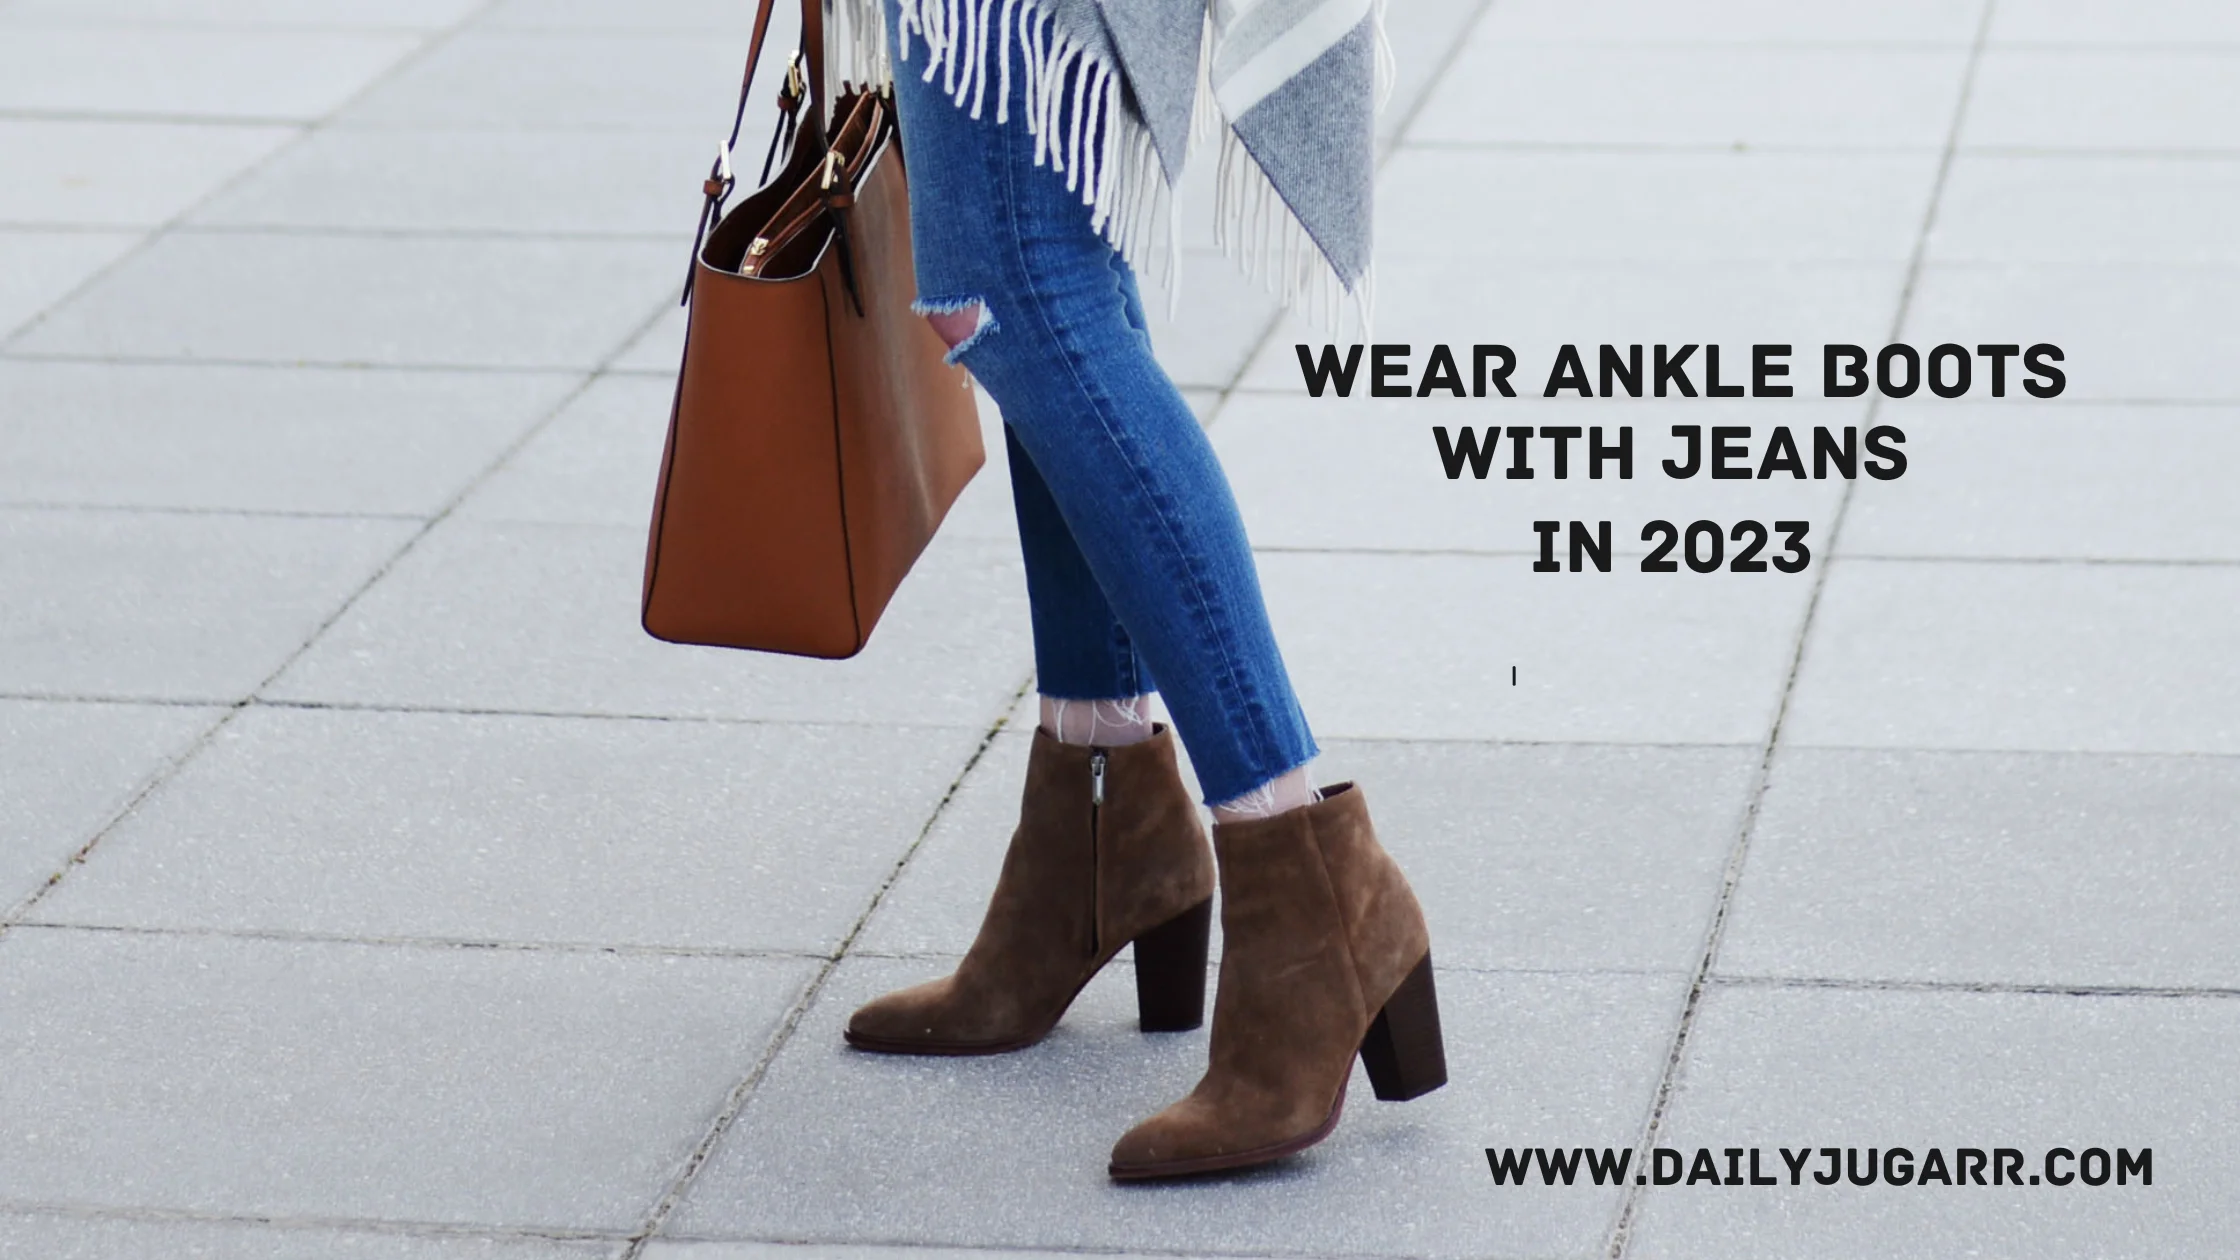 How to Wear Ankle Boots With Jeans in 2023 Best Outfit Ideas